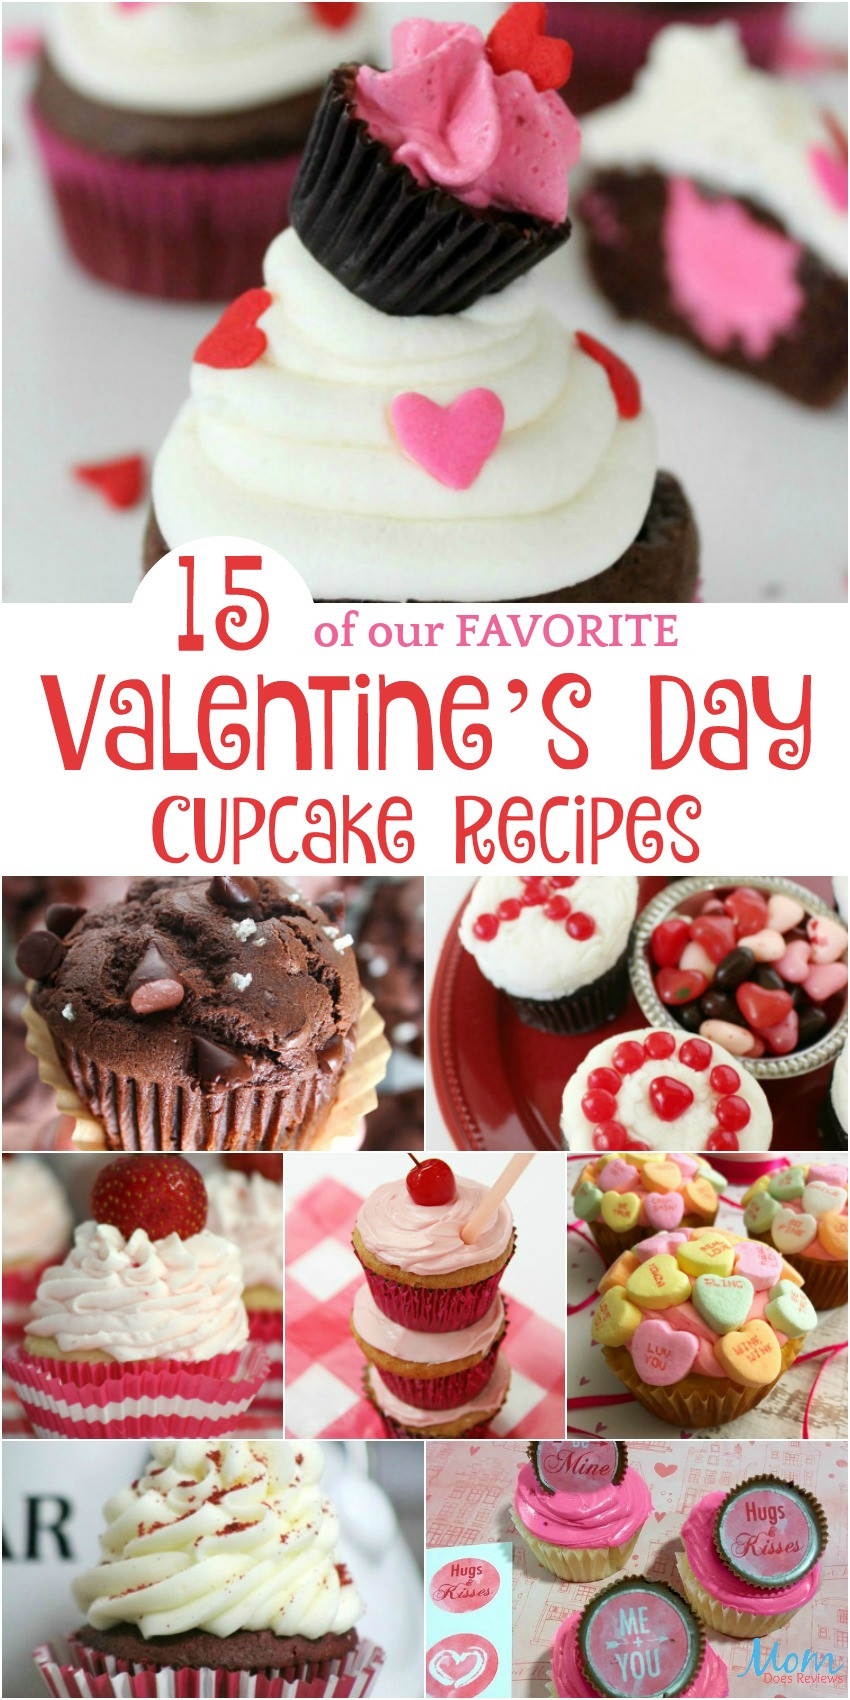 Valentine'S Day Cupcakes
 15 of our FAVORITE Valentine s Day Cupcake Recipes